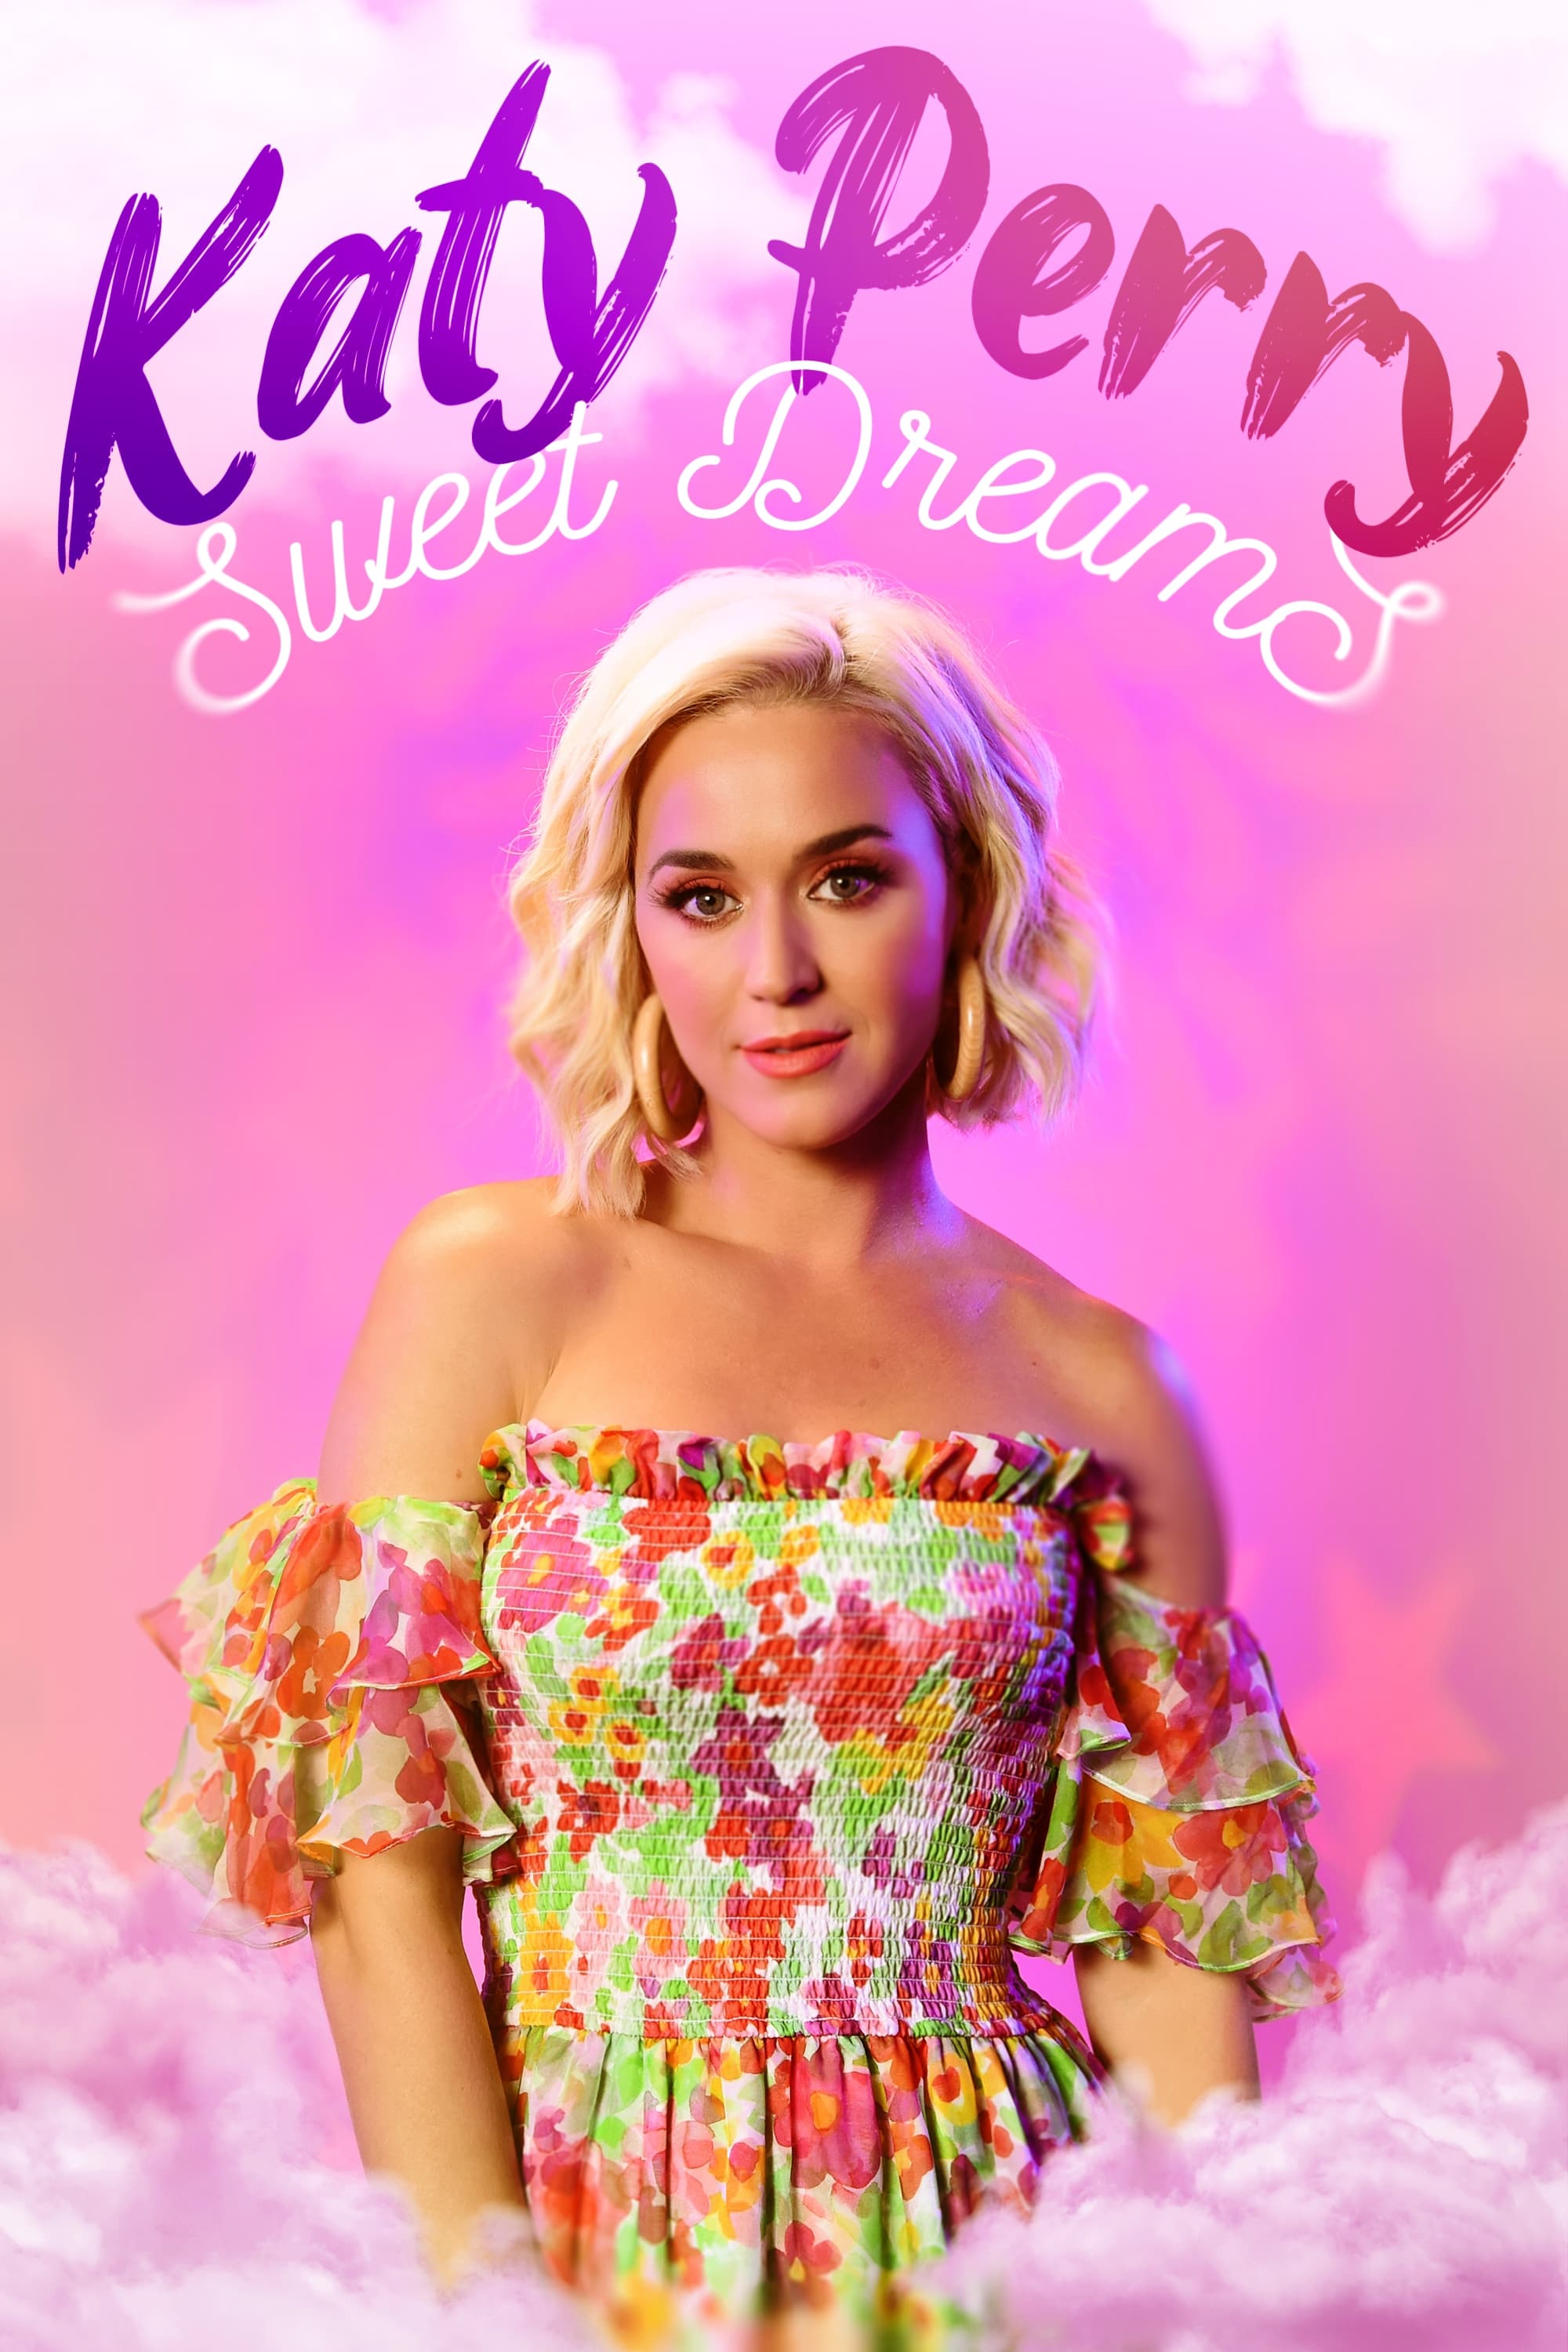 Katy Perry: Sweet Dreams on FREECABLE TV